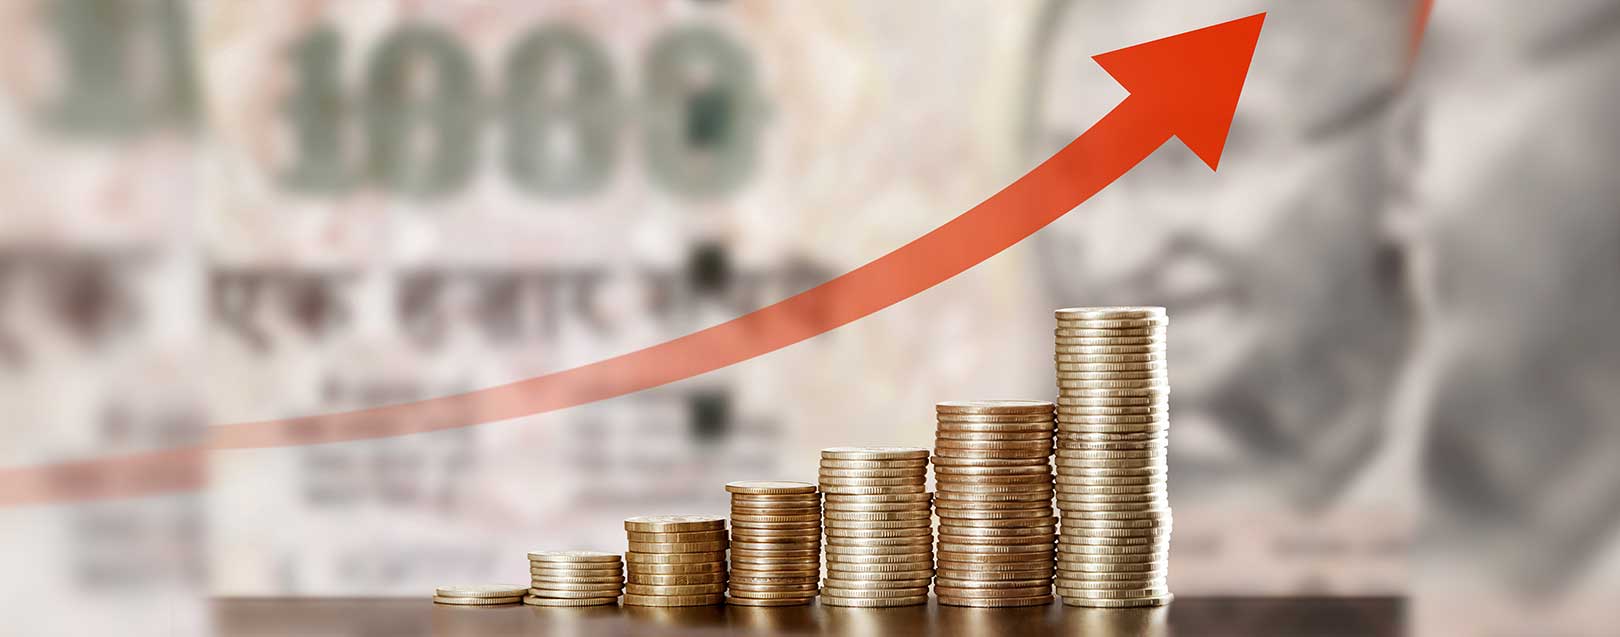 India on an upward trajectory, to grow at 7.3%: UN report